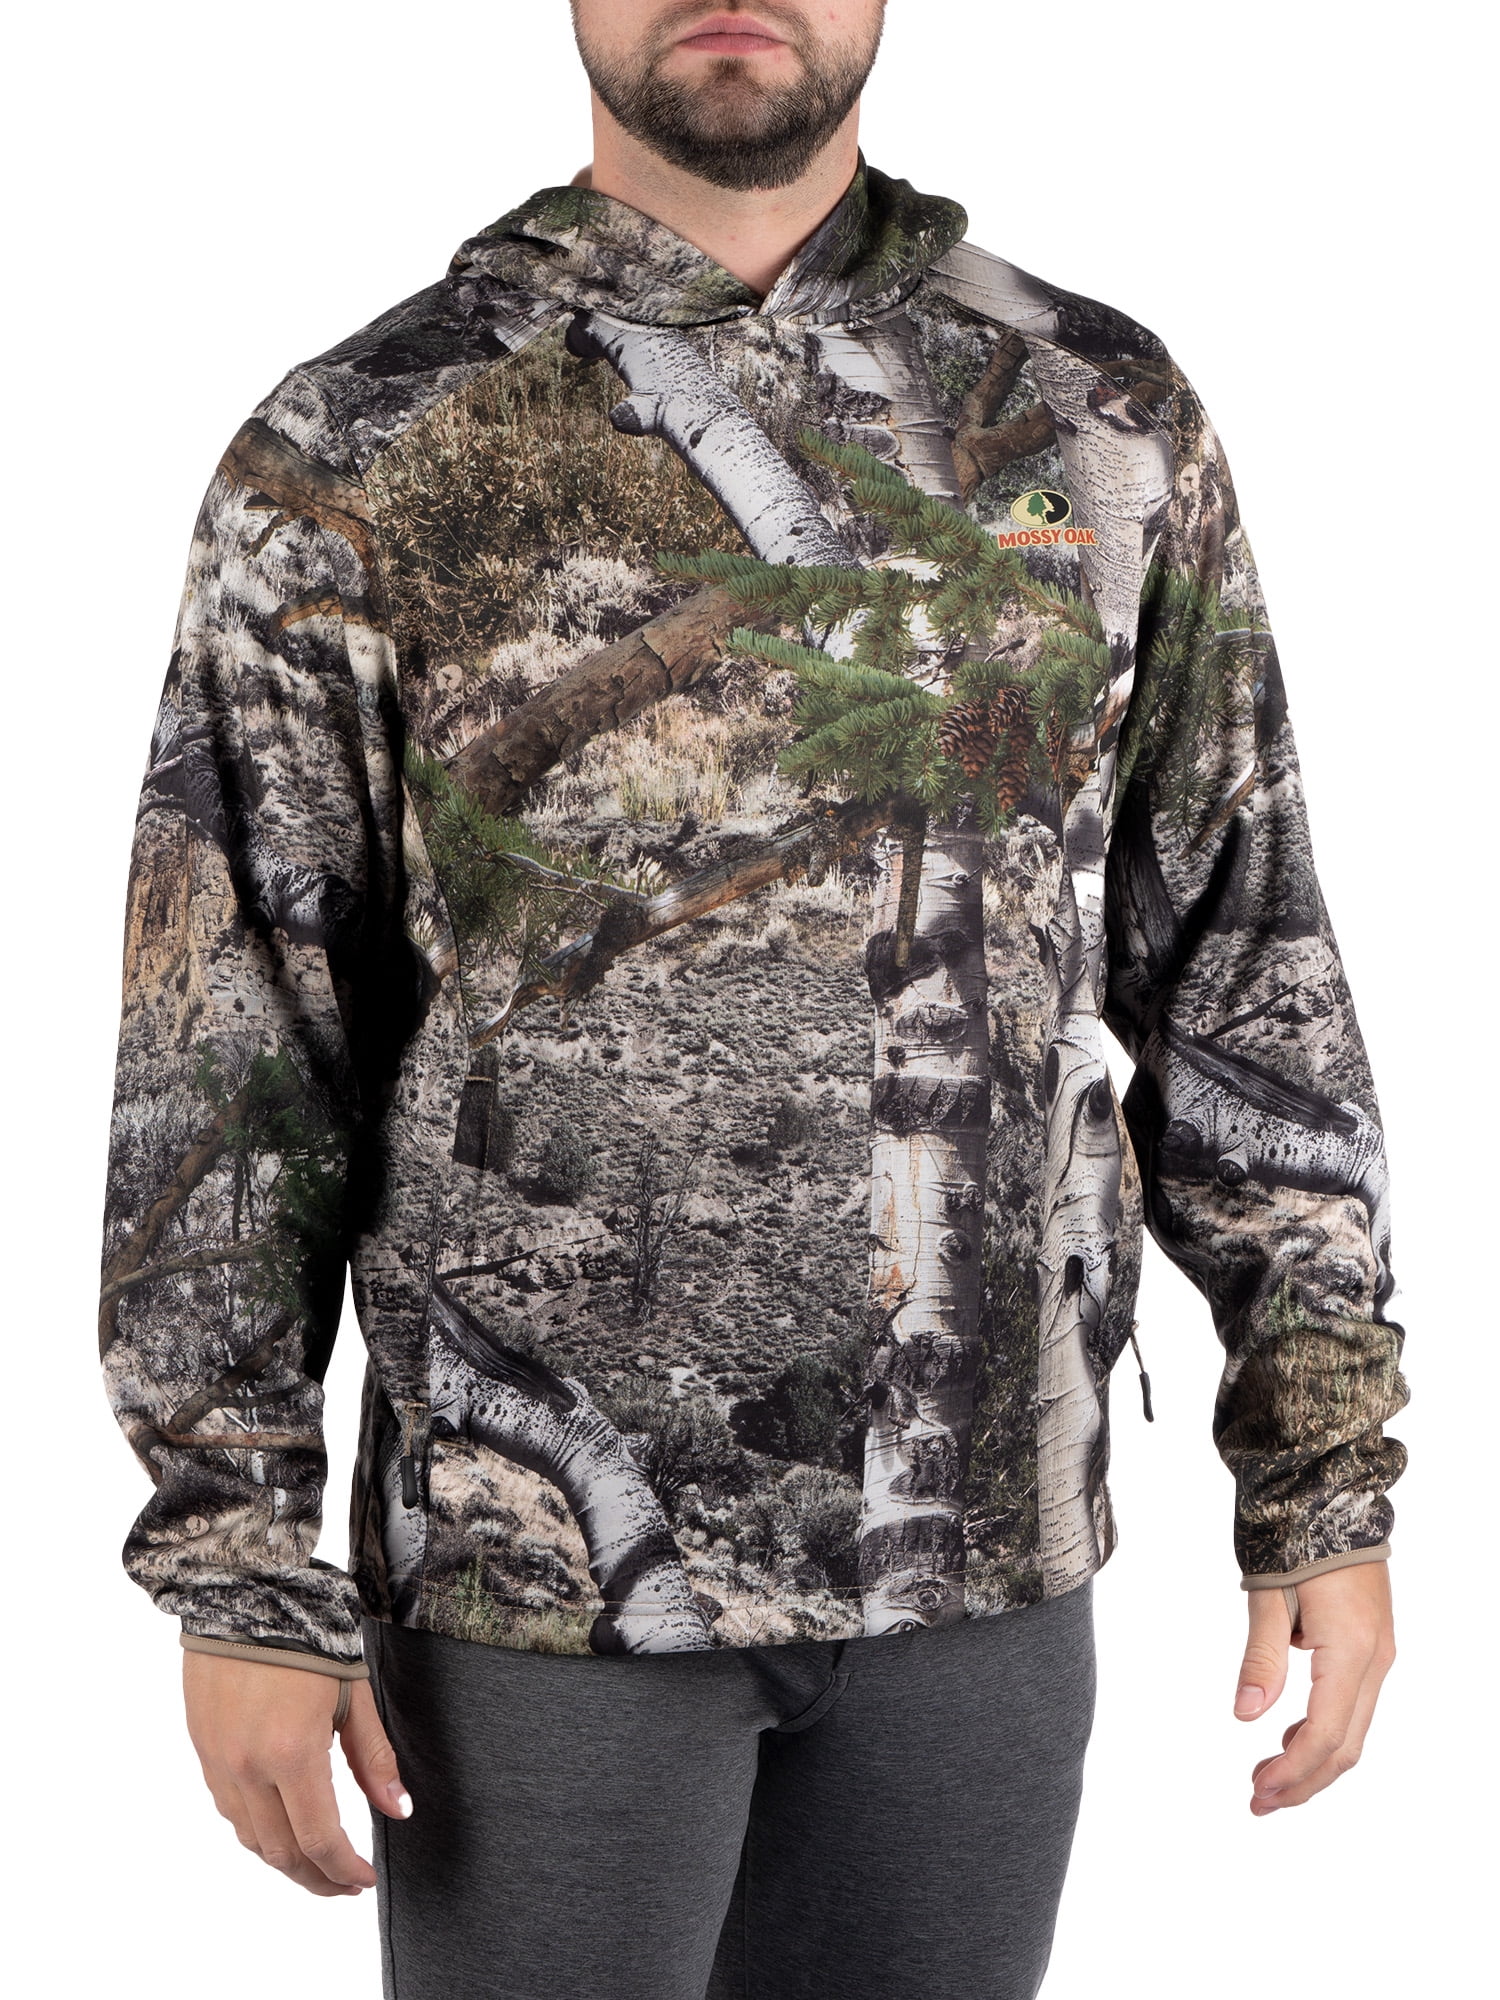 Men's Camo Hunting Performance Hoodie Pullover Sweatshirt by Mossy Oak,  Sizes S-3XL 